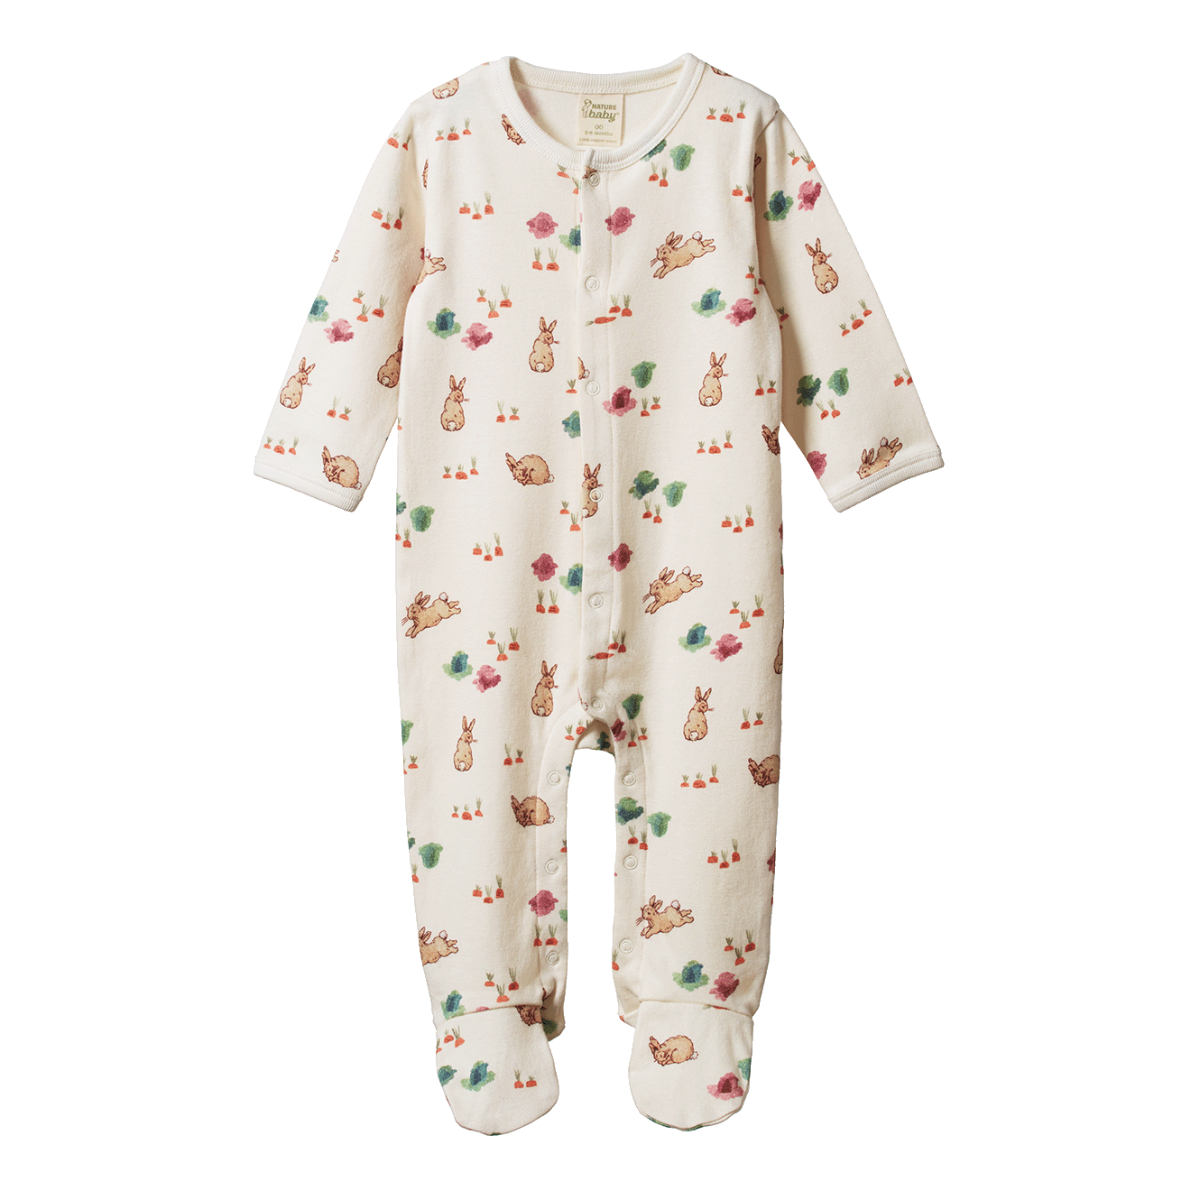 Cotton Stretch & Grow - Country Bunny Print